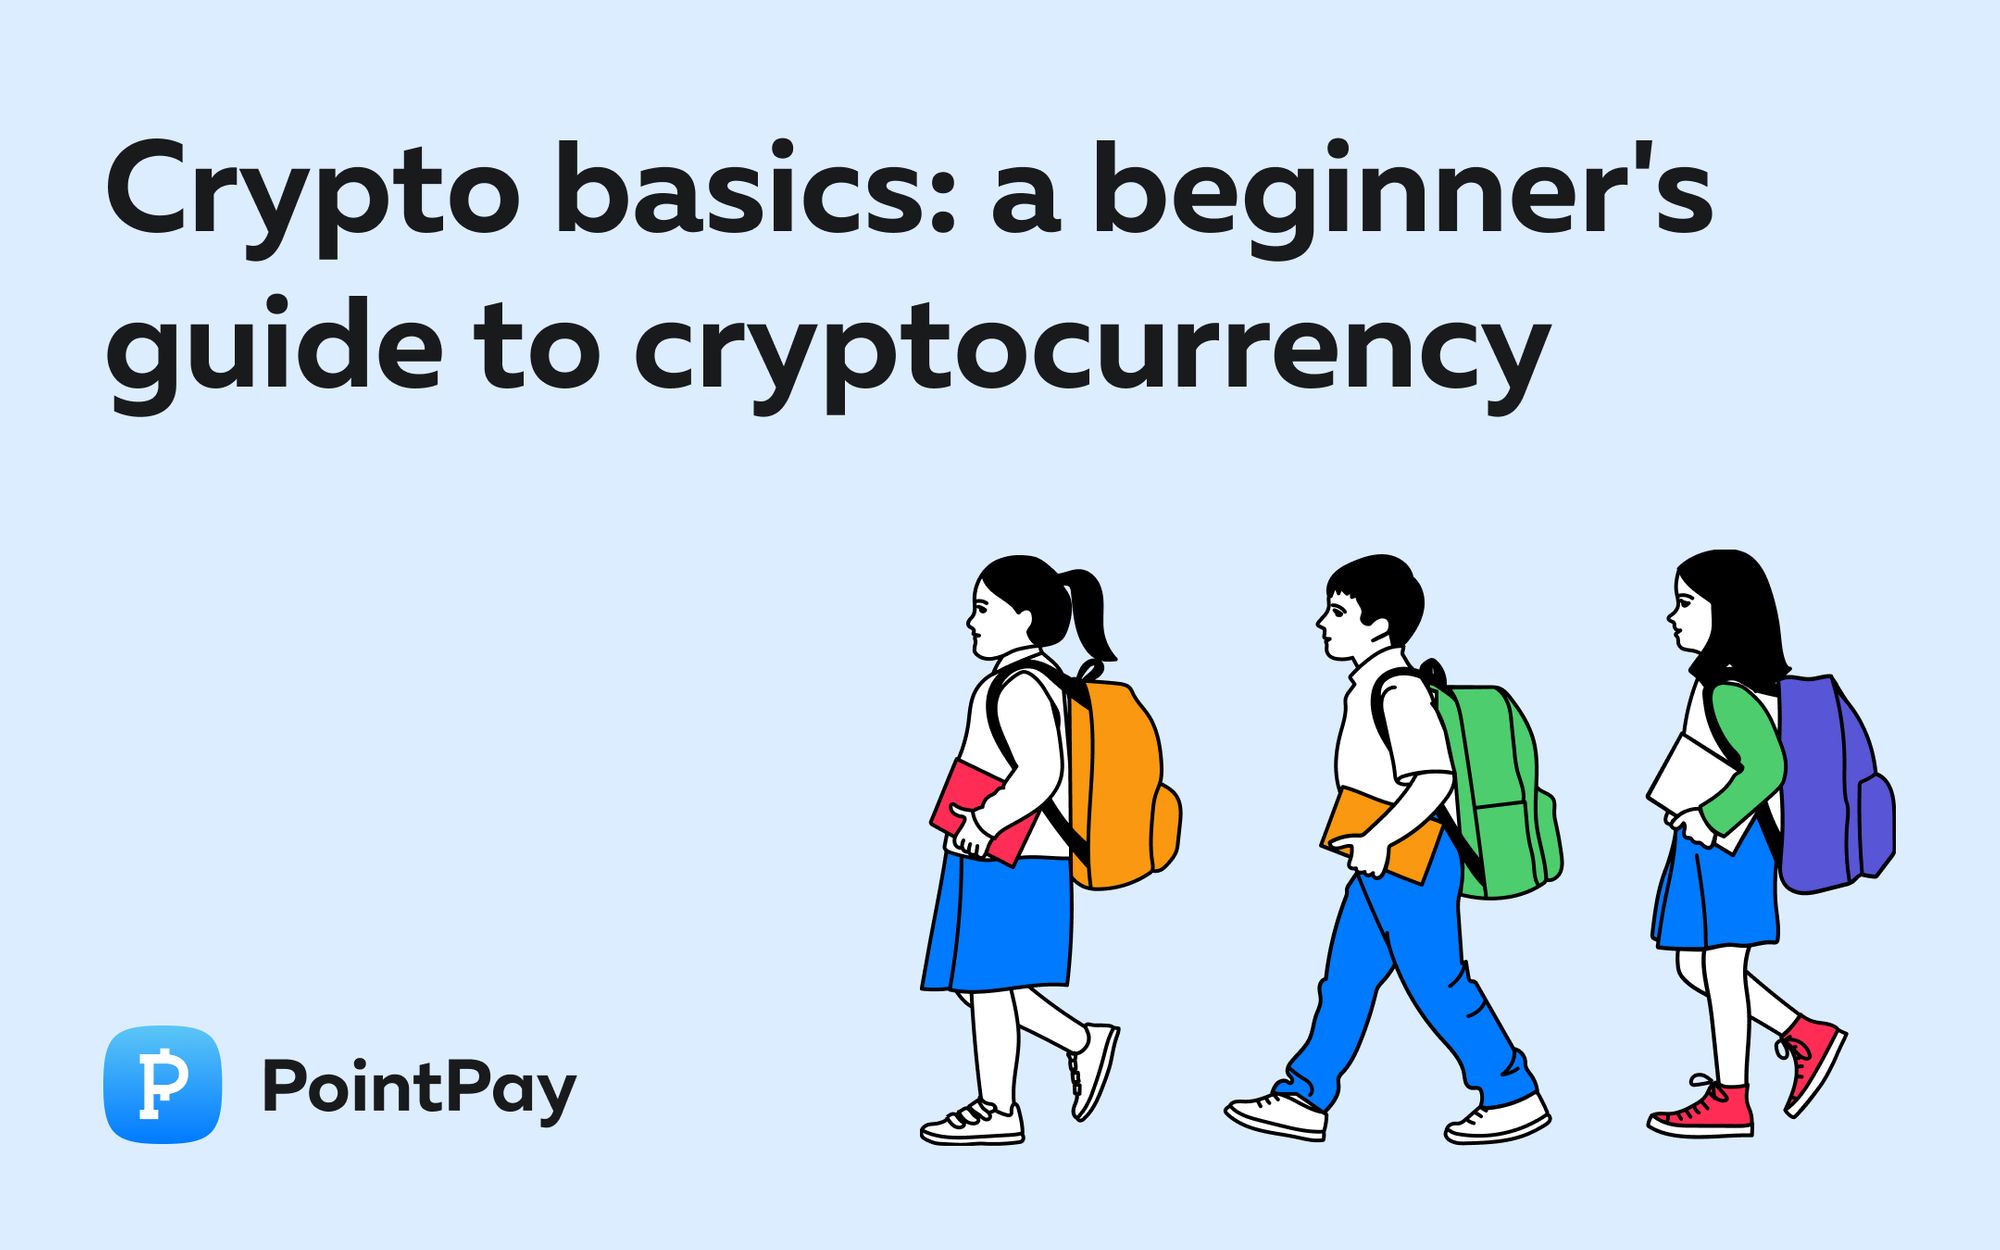 Crypto basics: a beginner’s guide to cryptocurrency